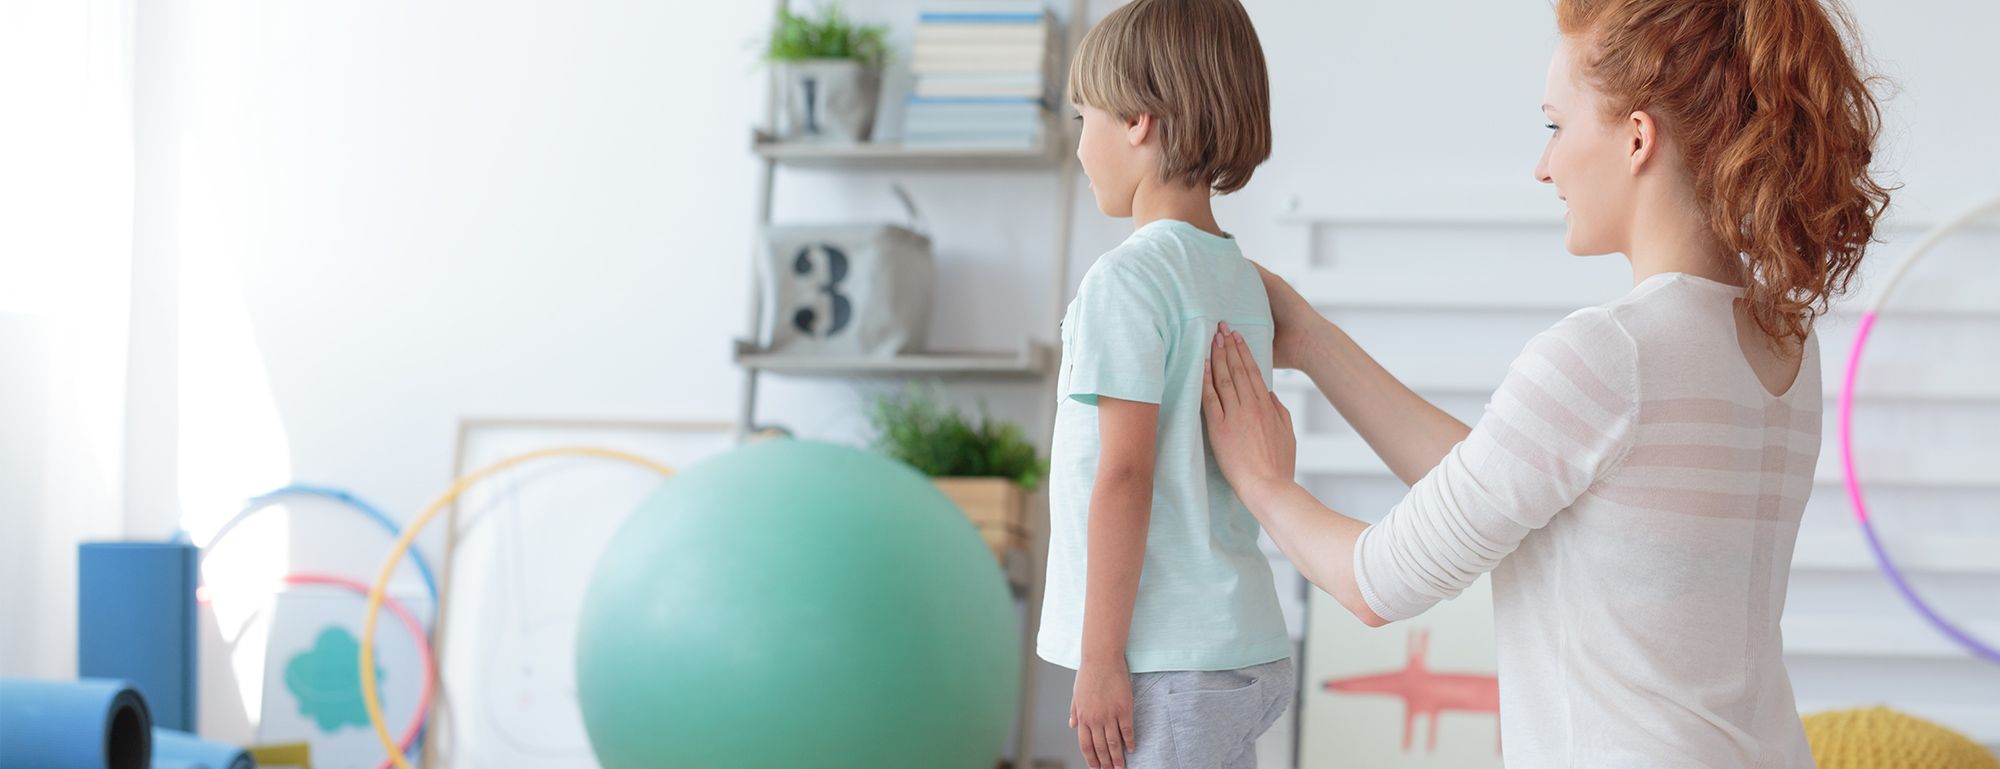 Non-Surgical Scoliosis Treatments | San Diego Chiropractor